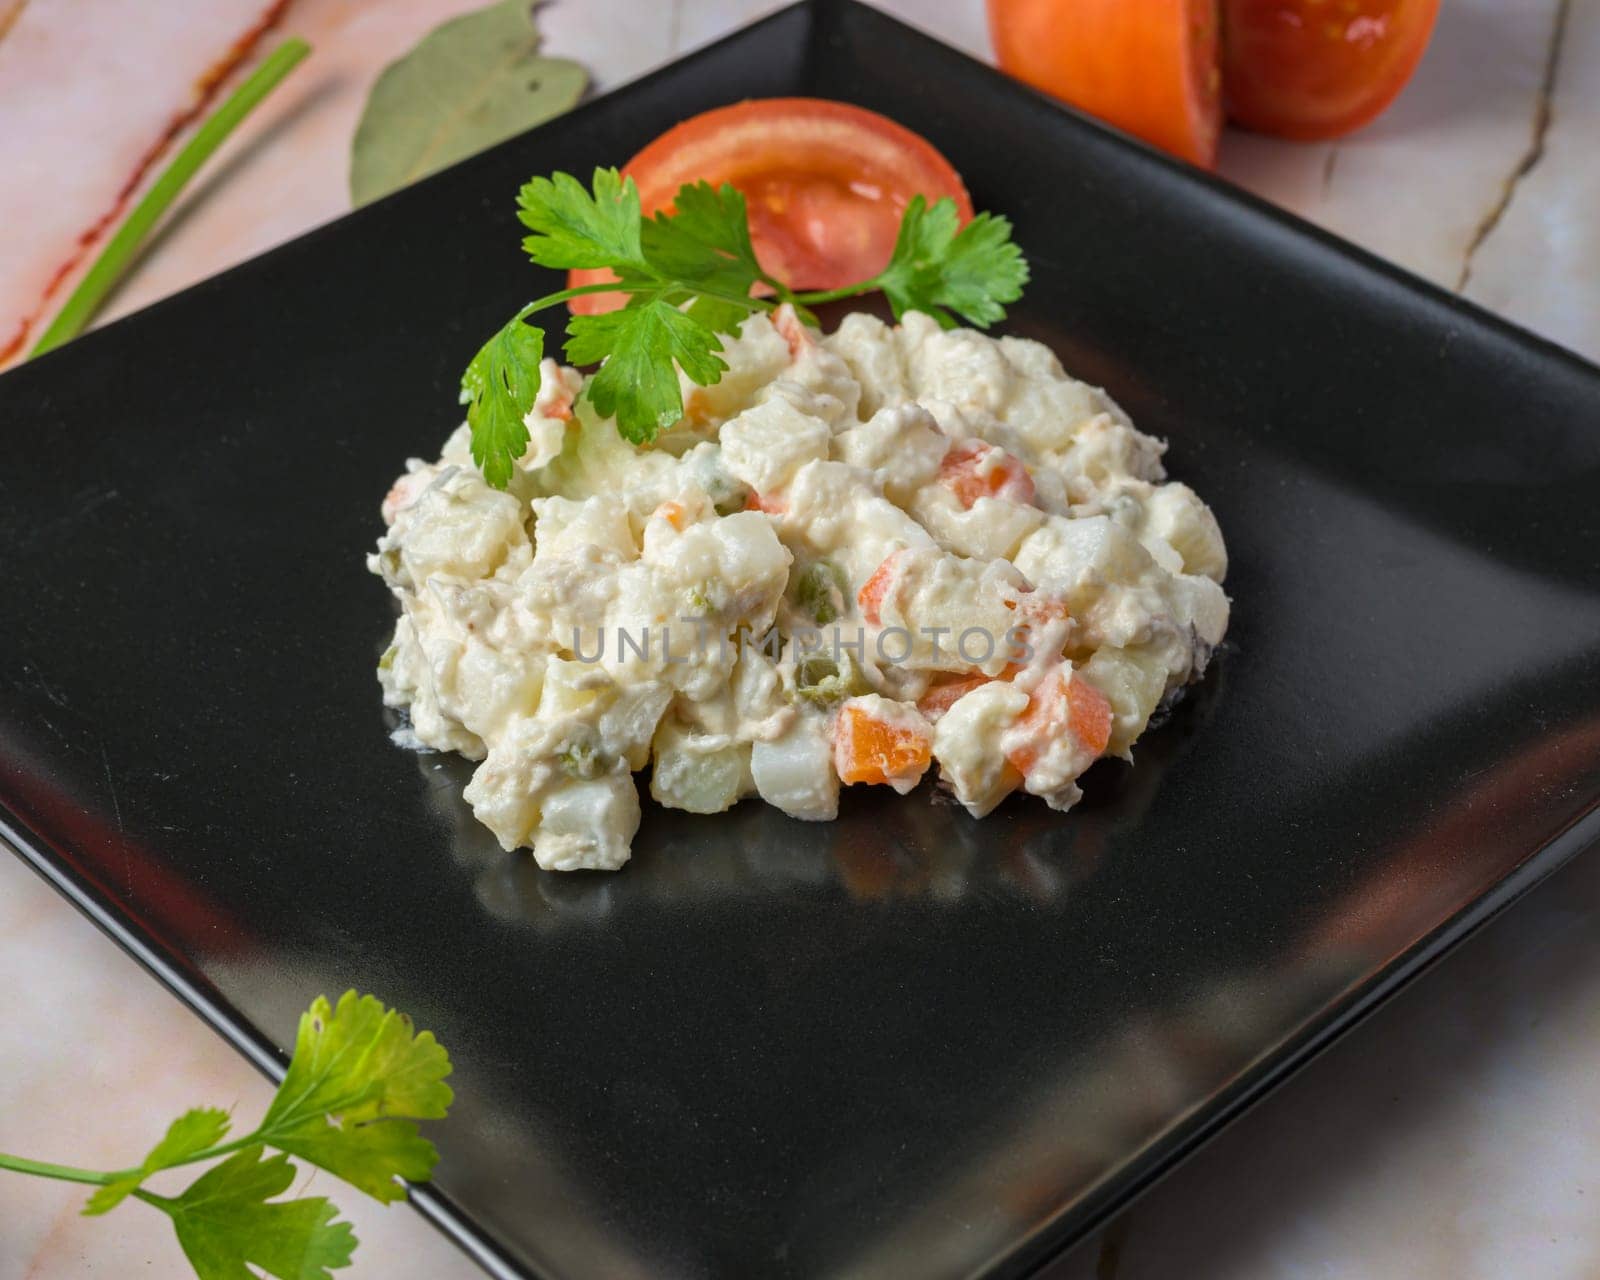 Russian salad Creamy potato salad garnished with parsley on a black plate, typical food, typical mediterranean mallorcan cuisine typical from balearic islands mallorca, spain by carlosviv